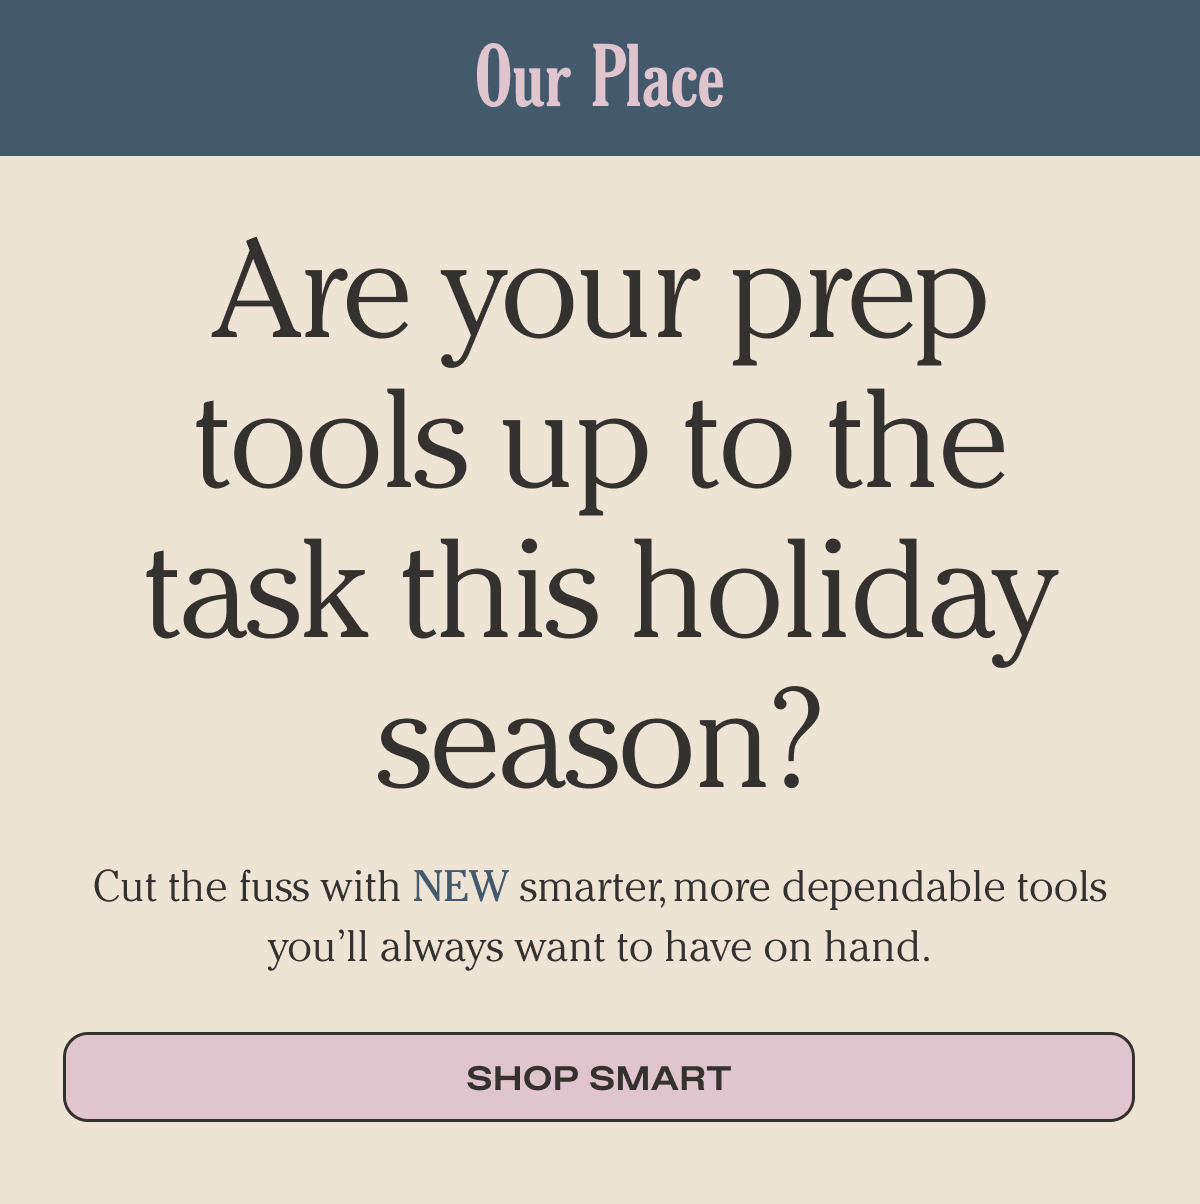 Our Place - Are your prep tools up to the task this holiday season? | Cut the fuss with NEW smarter, more dependable tools you’ll always want to have on hand. | Shop Smart